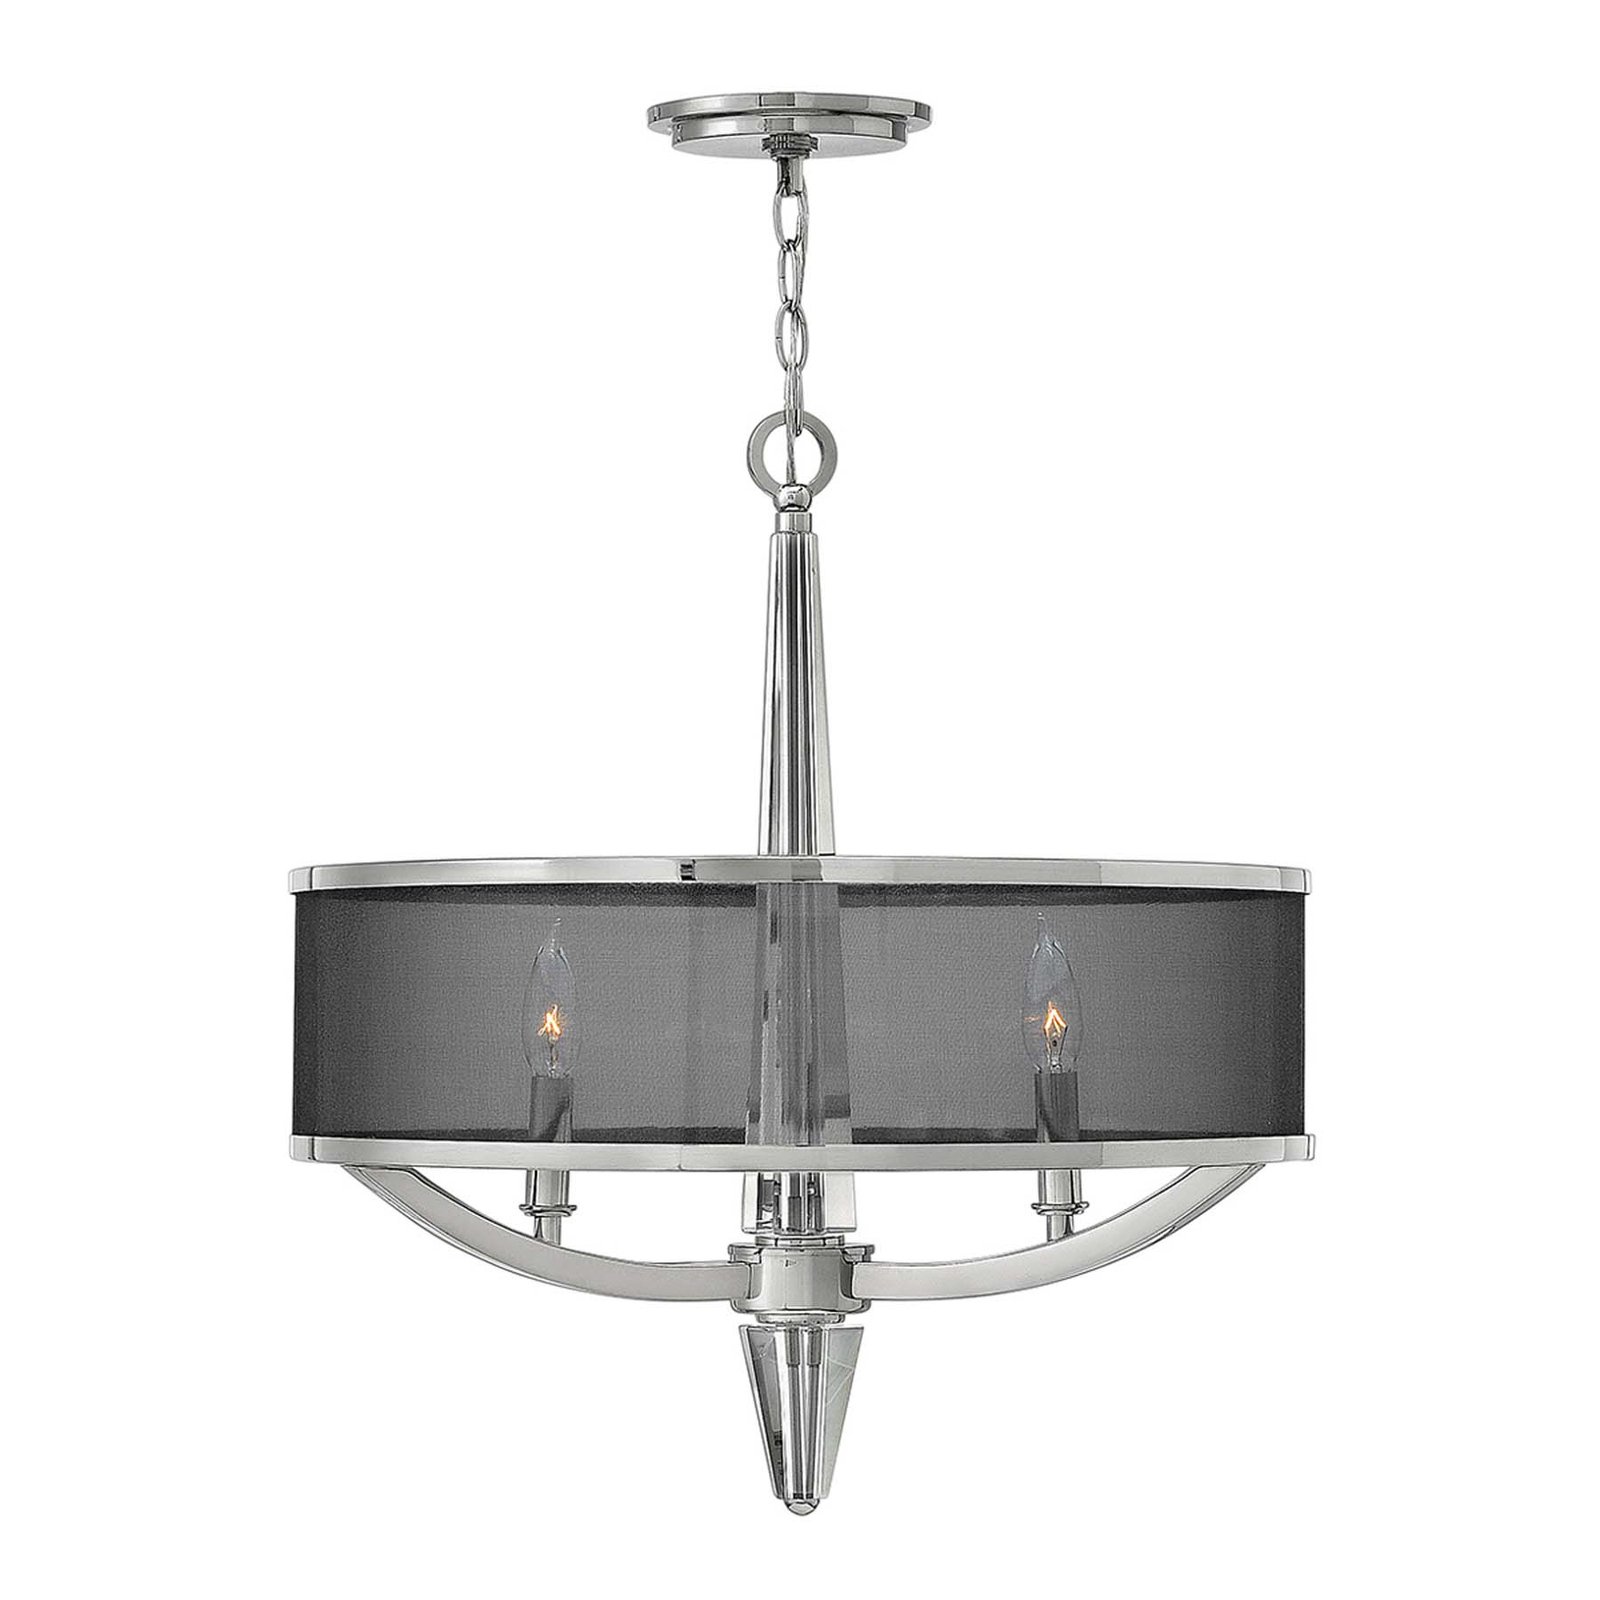 Ashtray chandelier with oganza shade, 3-bulb